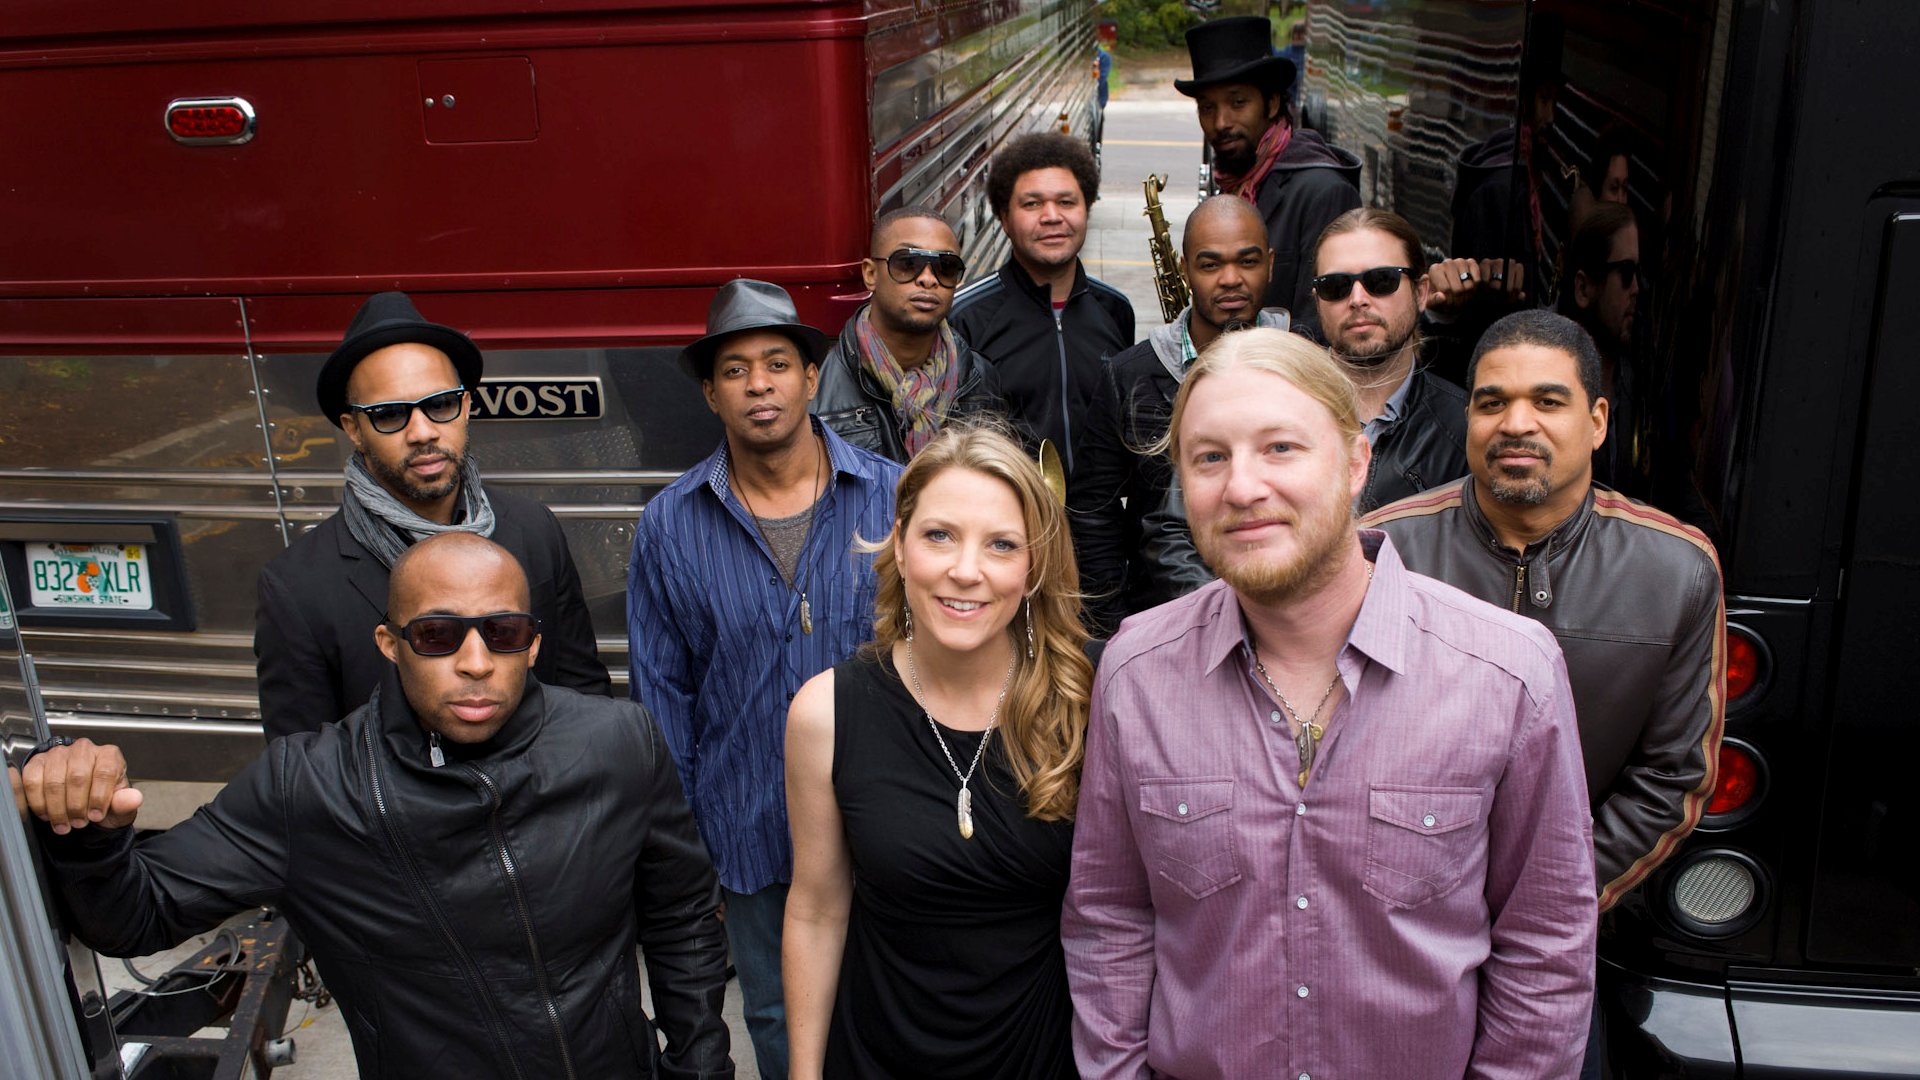 Come See About Me av Tedeschi Trucks Band